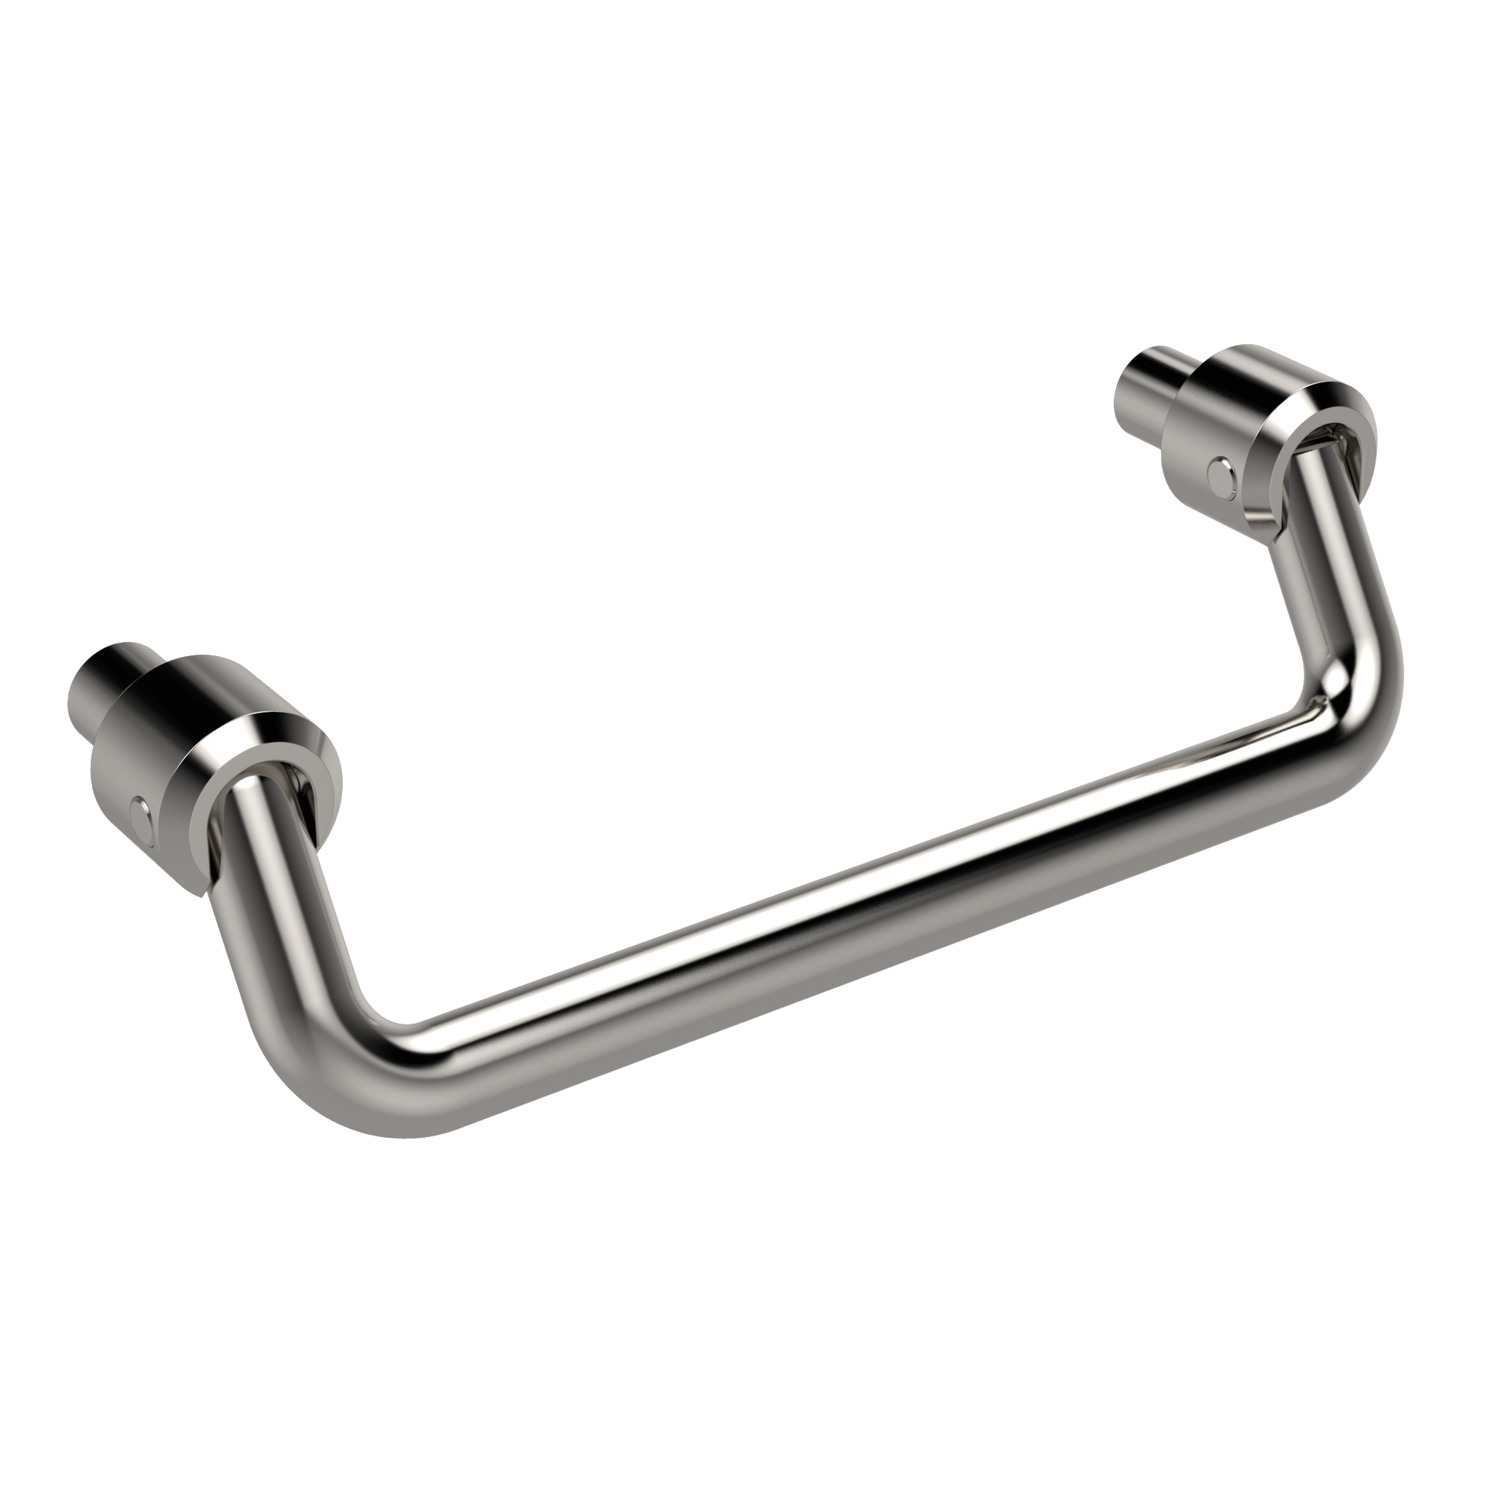 Pull Handles - Collapsible A collapsible stainless free moving pull handle with spring-arrest in both retracted and extended positions. Minimum stress resistance 500N.